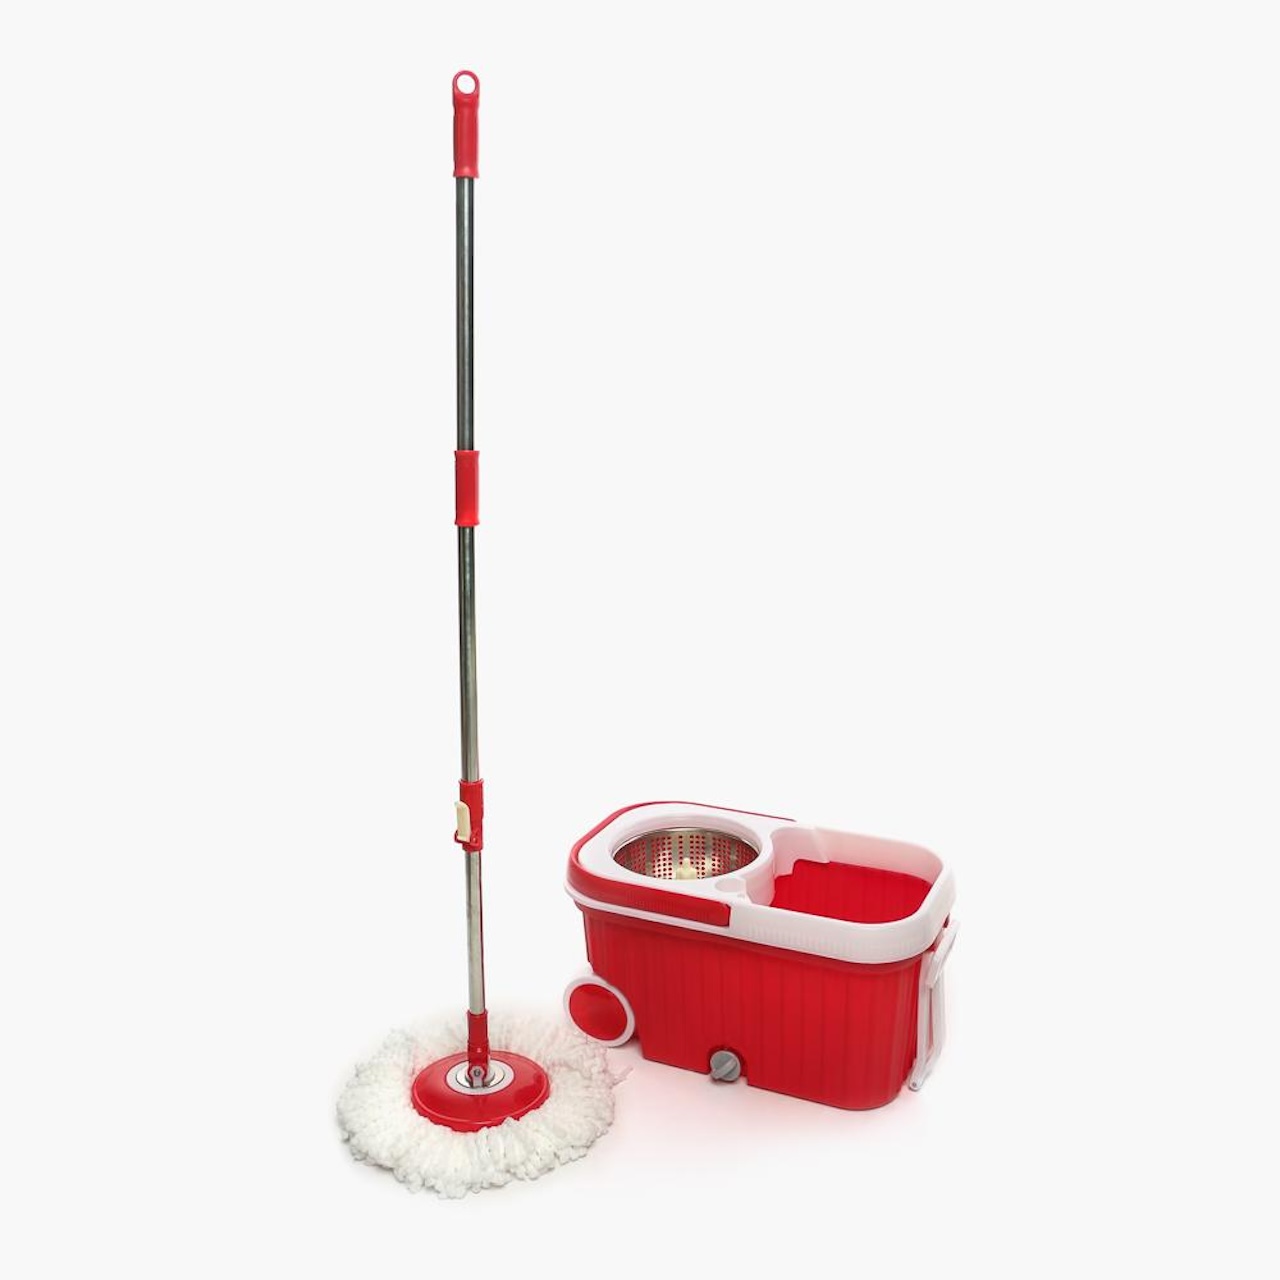 Tsmine Spin Mop Bucket System Stainless Steel Deluxe 360 Spinning Mop Bucket Floor Cleaning System with 6 Microfiber Replacement Head Refills